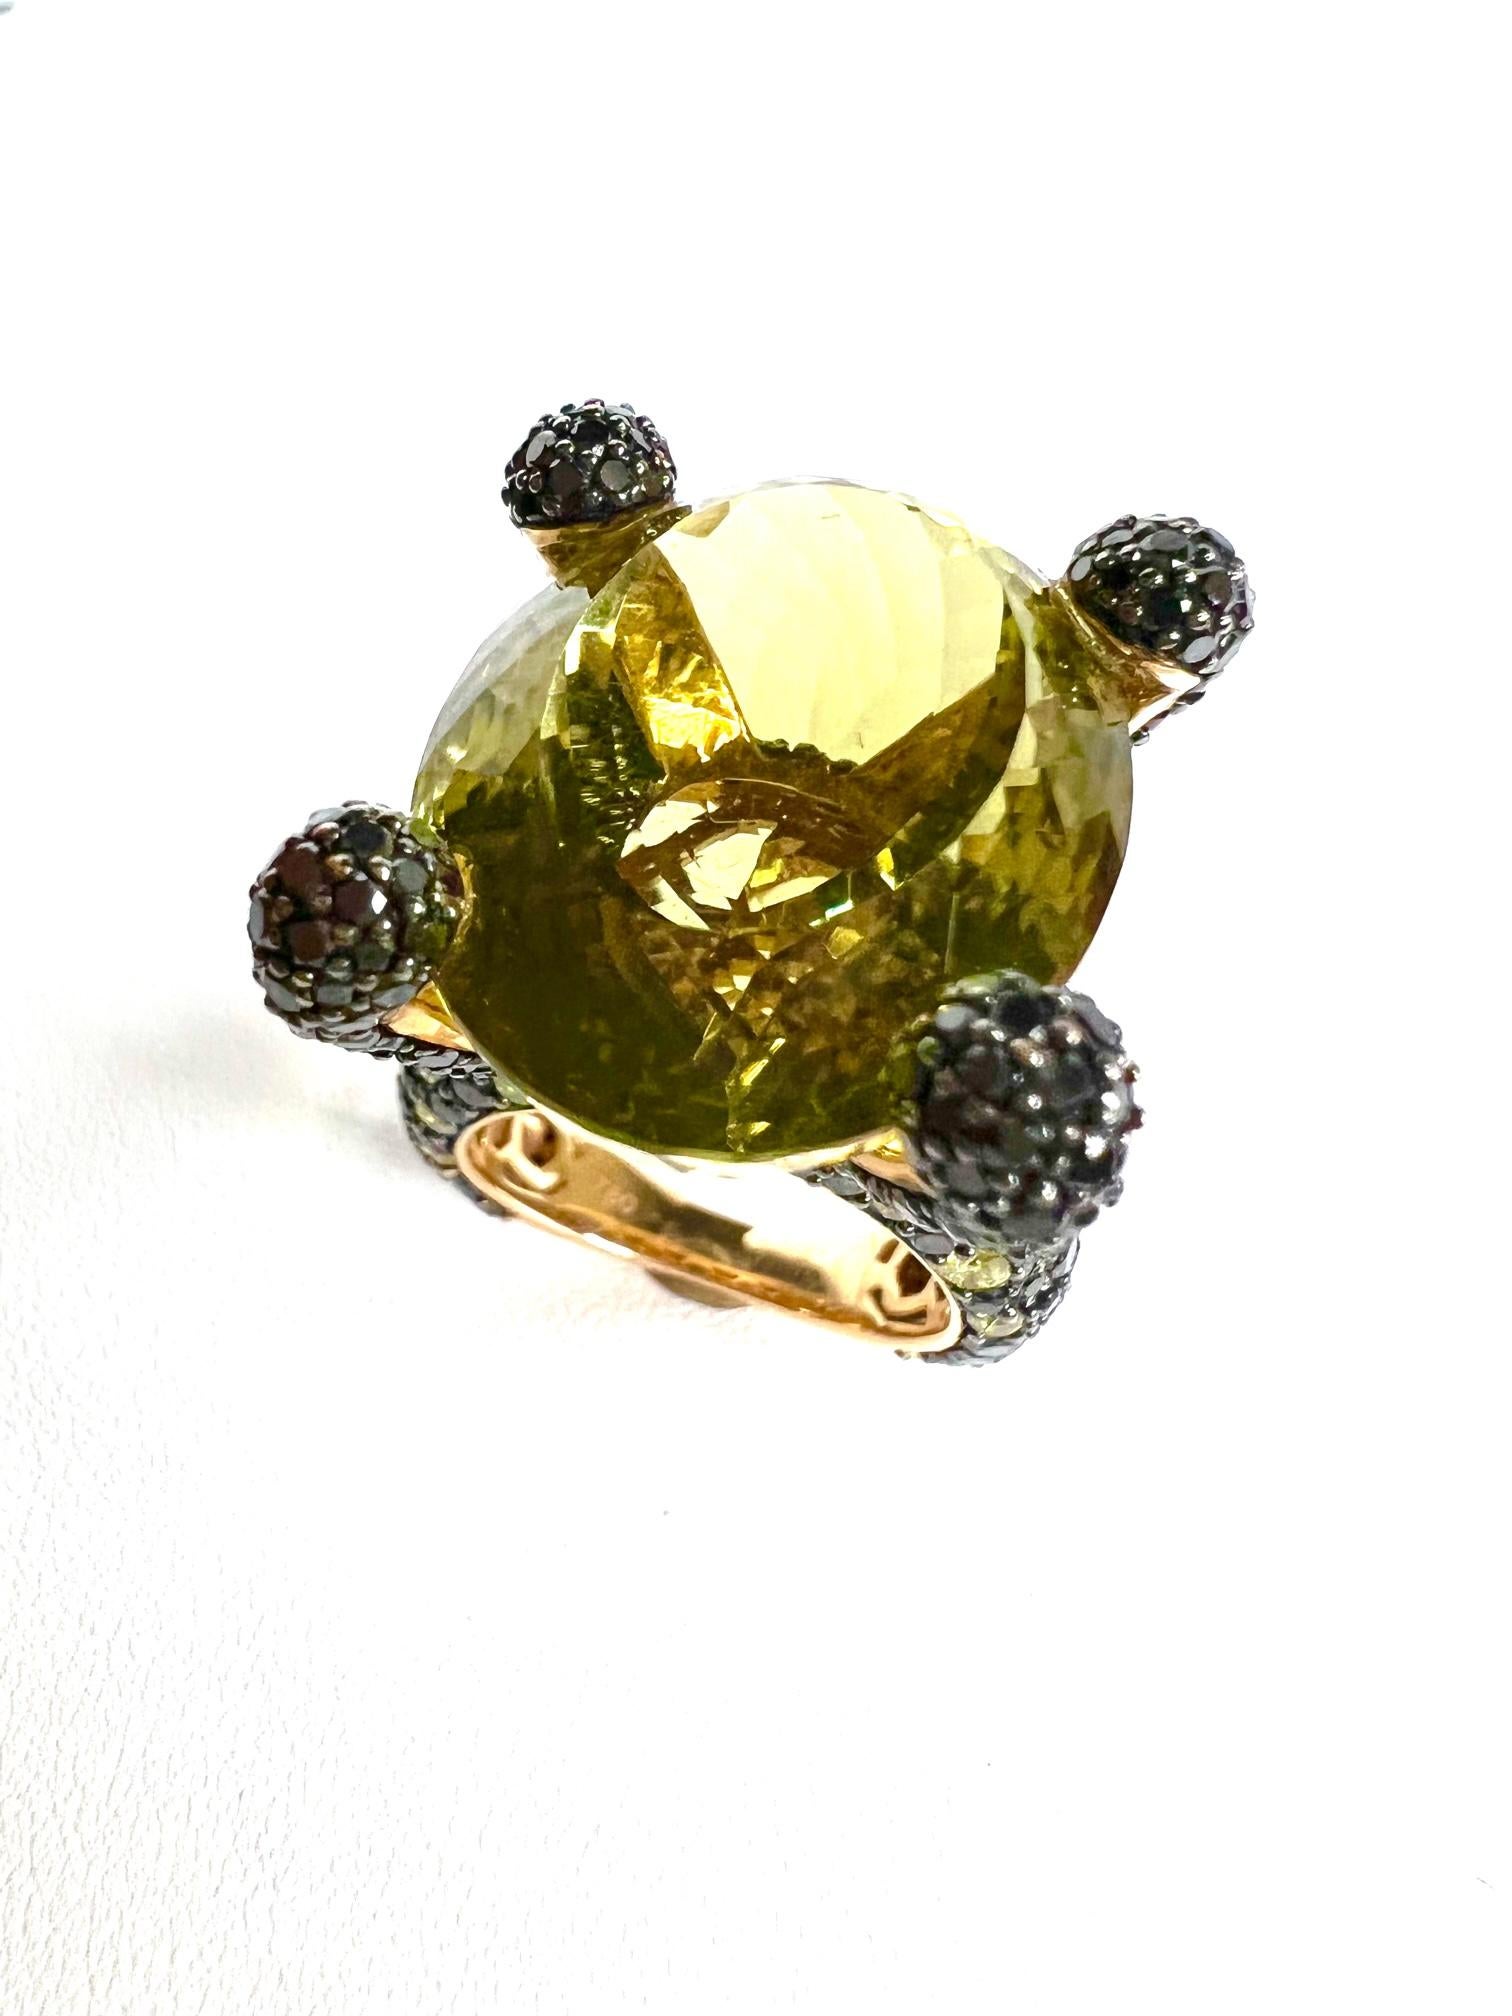 Thomas Leyser is renowned for his contemporary jewellery designs utilizing fine gemstones.

Ring in 18k red gold 13,4gr. with 1 lemon-citrine oval 22,8x17,9mm + yellow/SI diamonds 1,23cts. + black diamonds 4,56cts.. 

Ringsize is 55(7,2) and